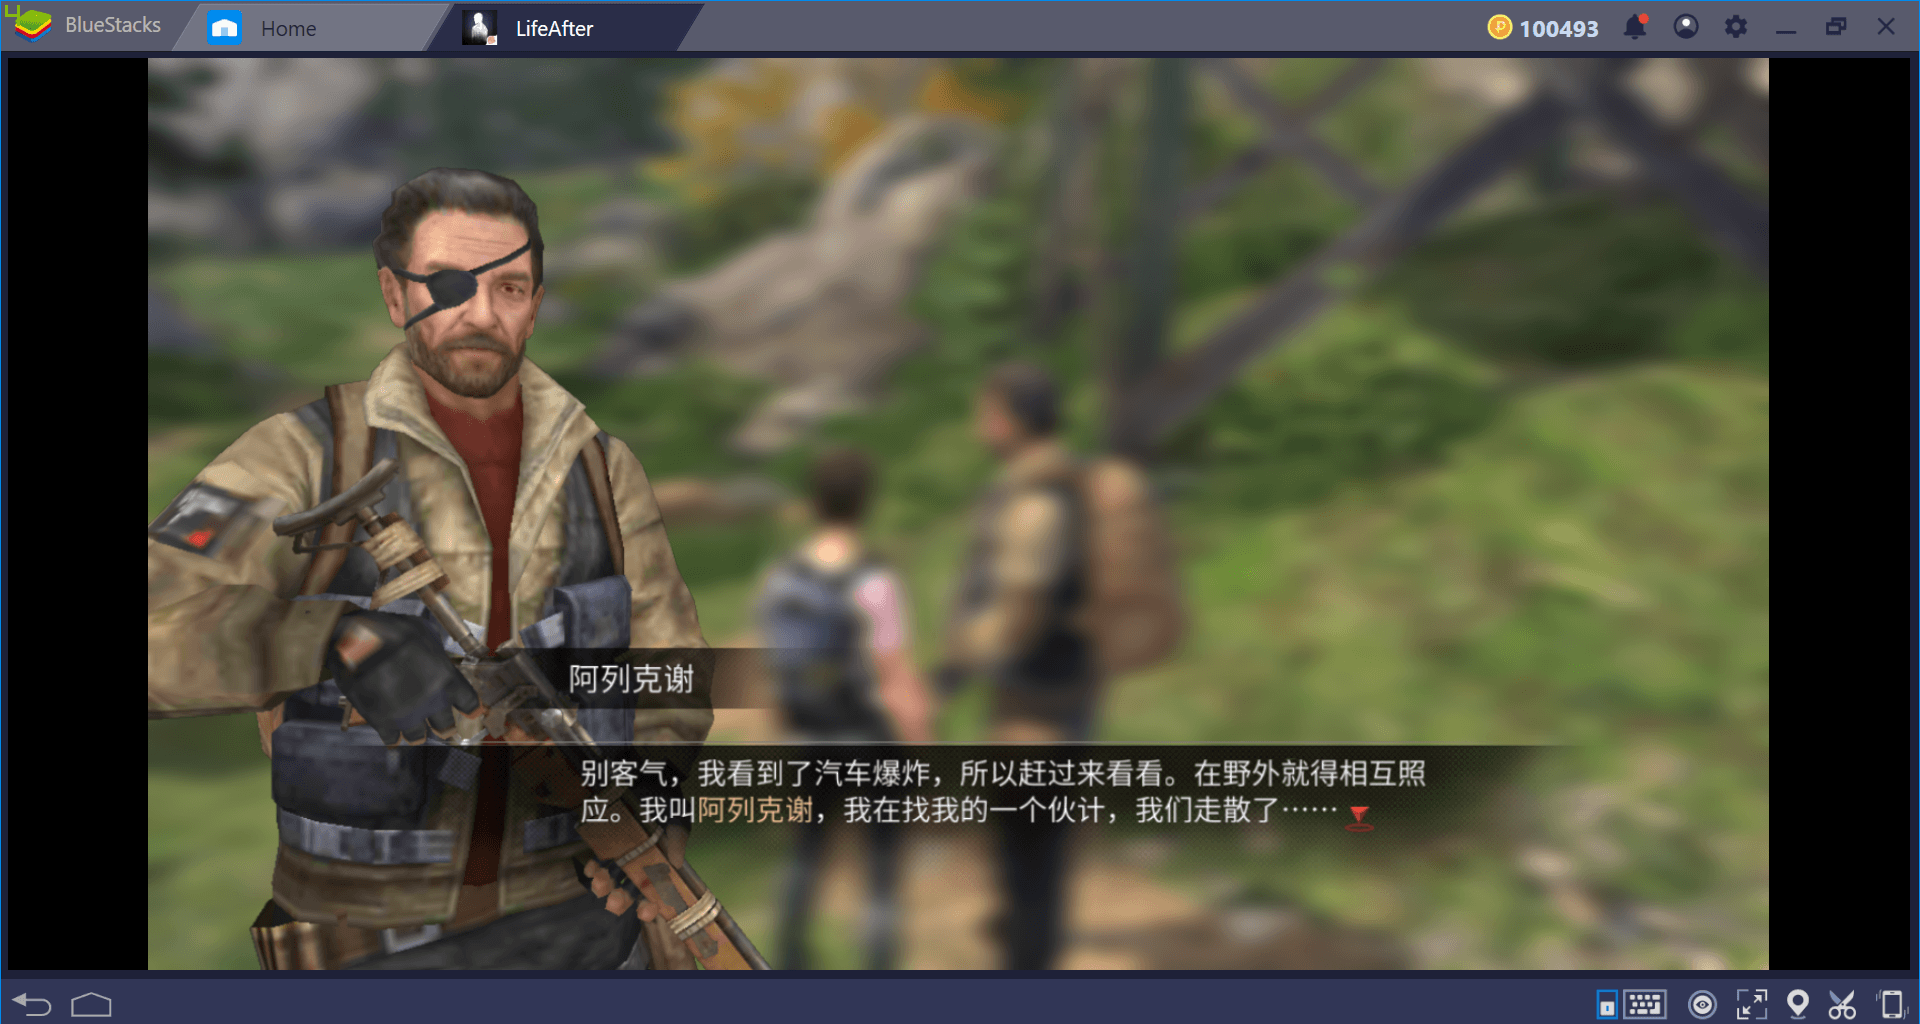 BlueStacks presents Real-time In-game Translation: Play All Games in Your Local Language